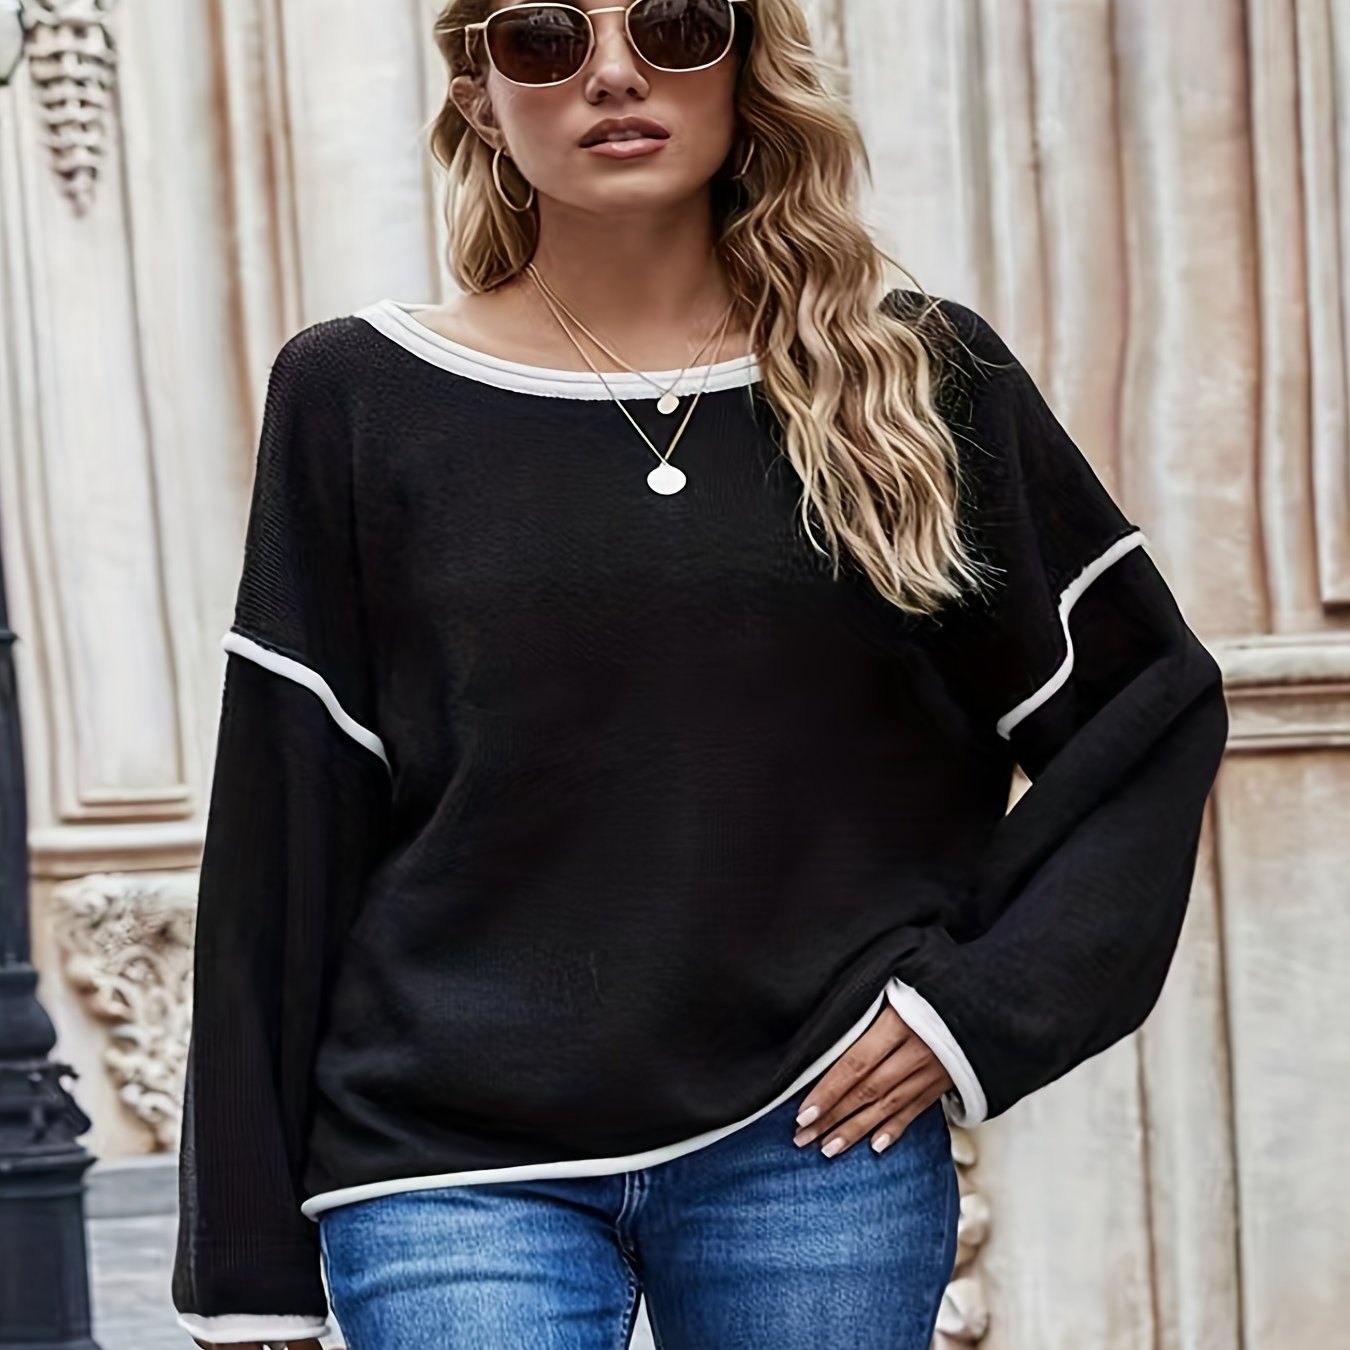 Plus Size Casual Sweater, Women's Plus Solid Long Sleeve Round Neck Slight Stretch Loose Sweater black